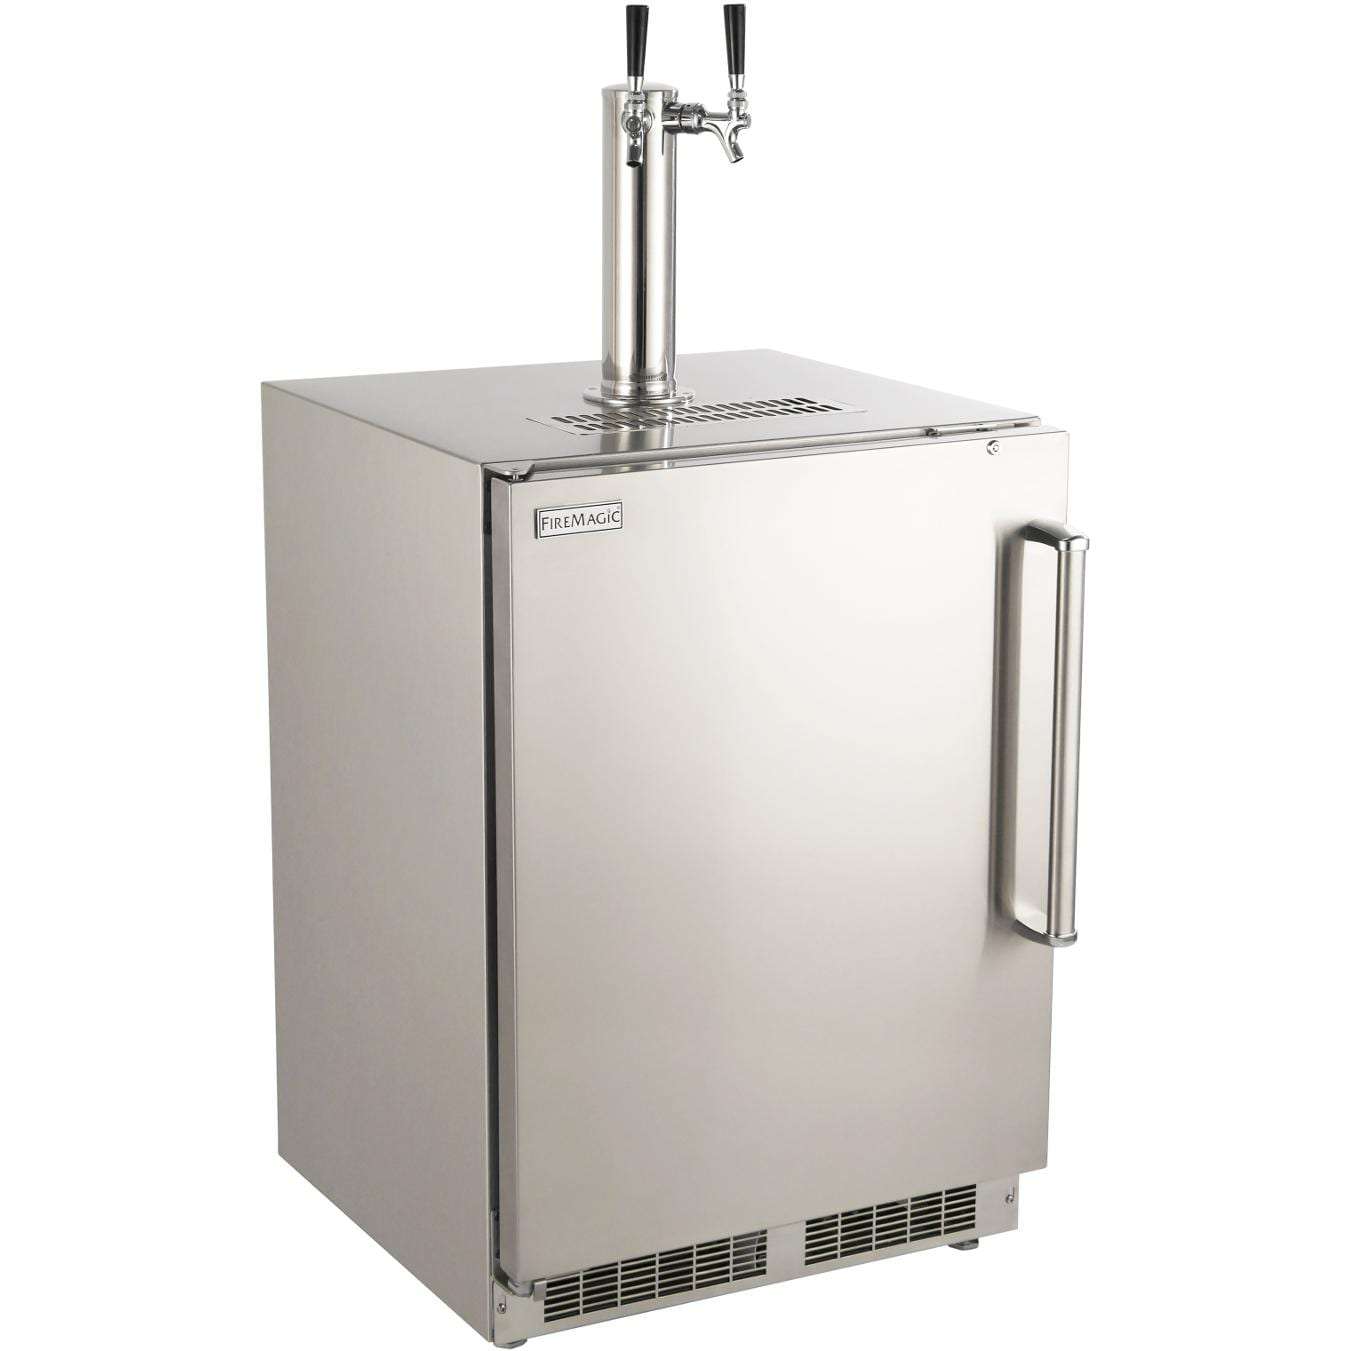 What’s The Appropriate Kegerator Size For A 24 Inch Depth